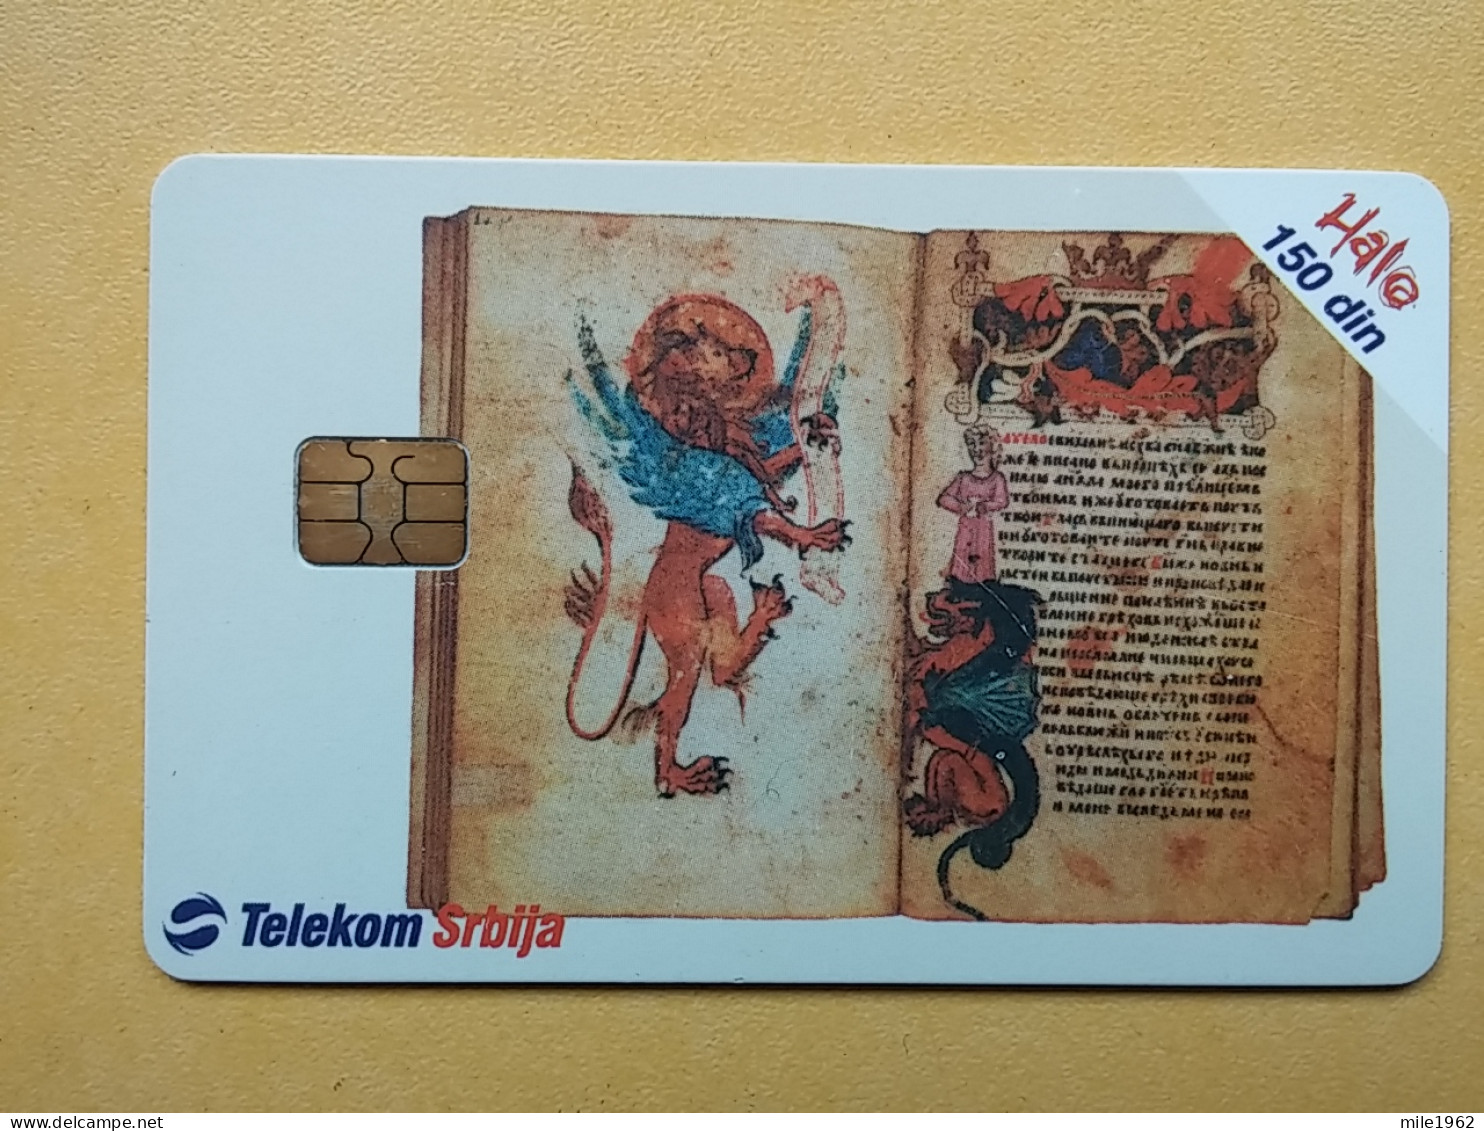 T-8 - SERBIA, TELECARD, PHONECARD,  - Other - Europe